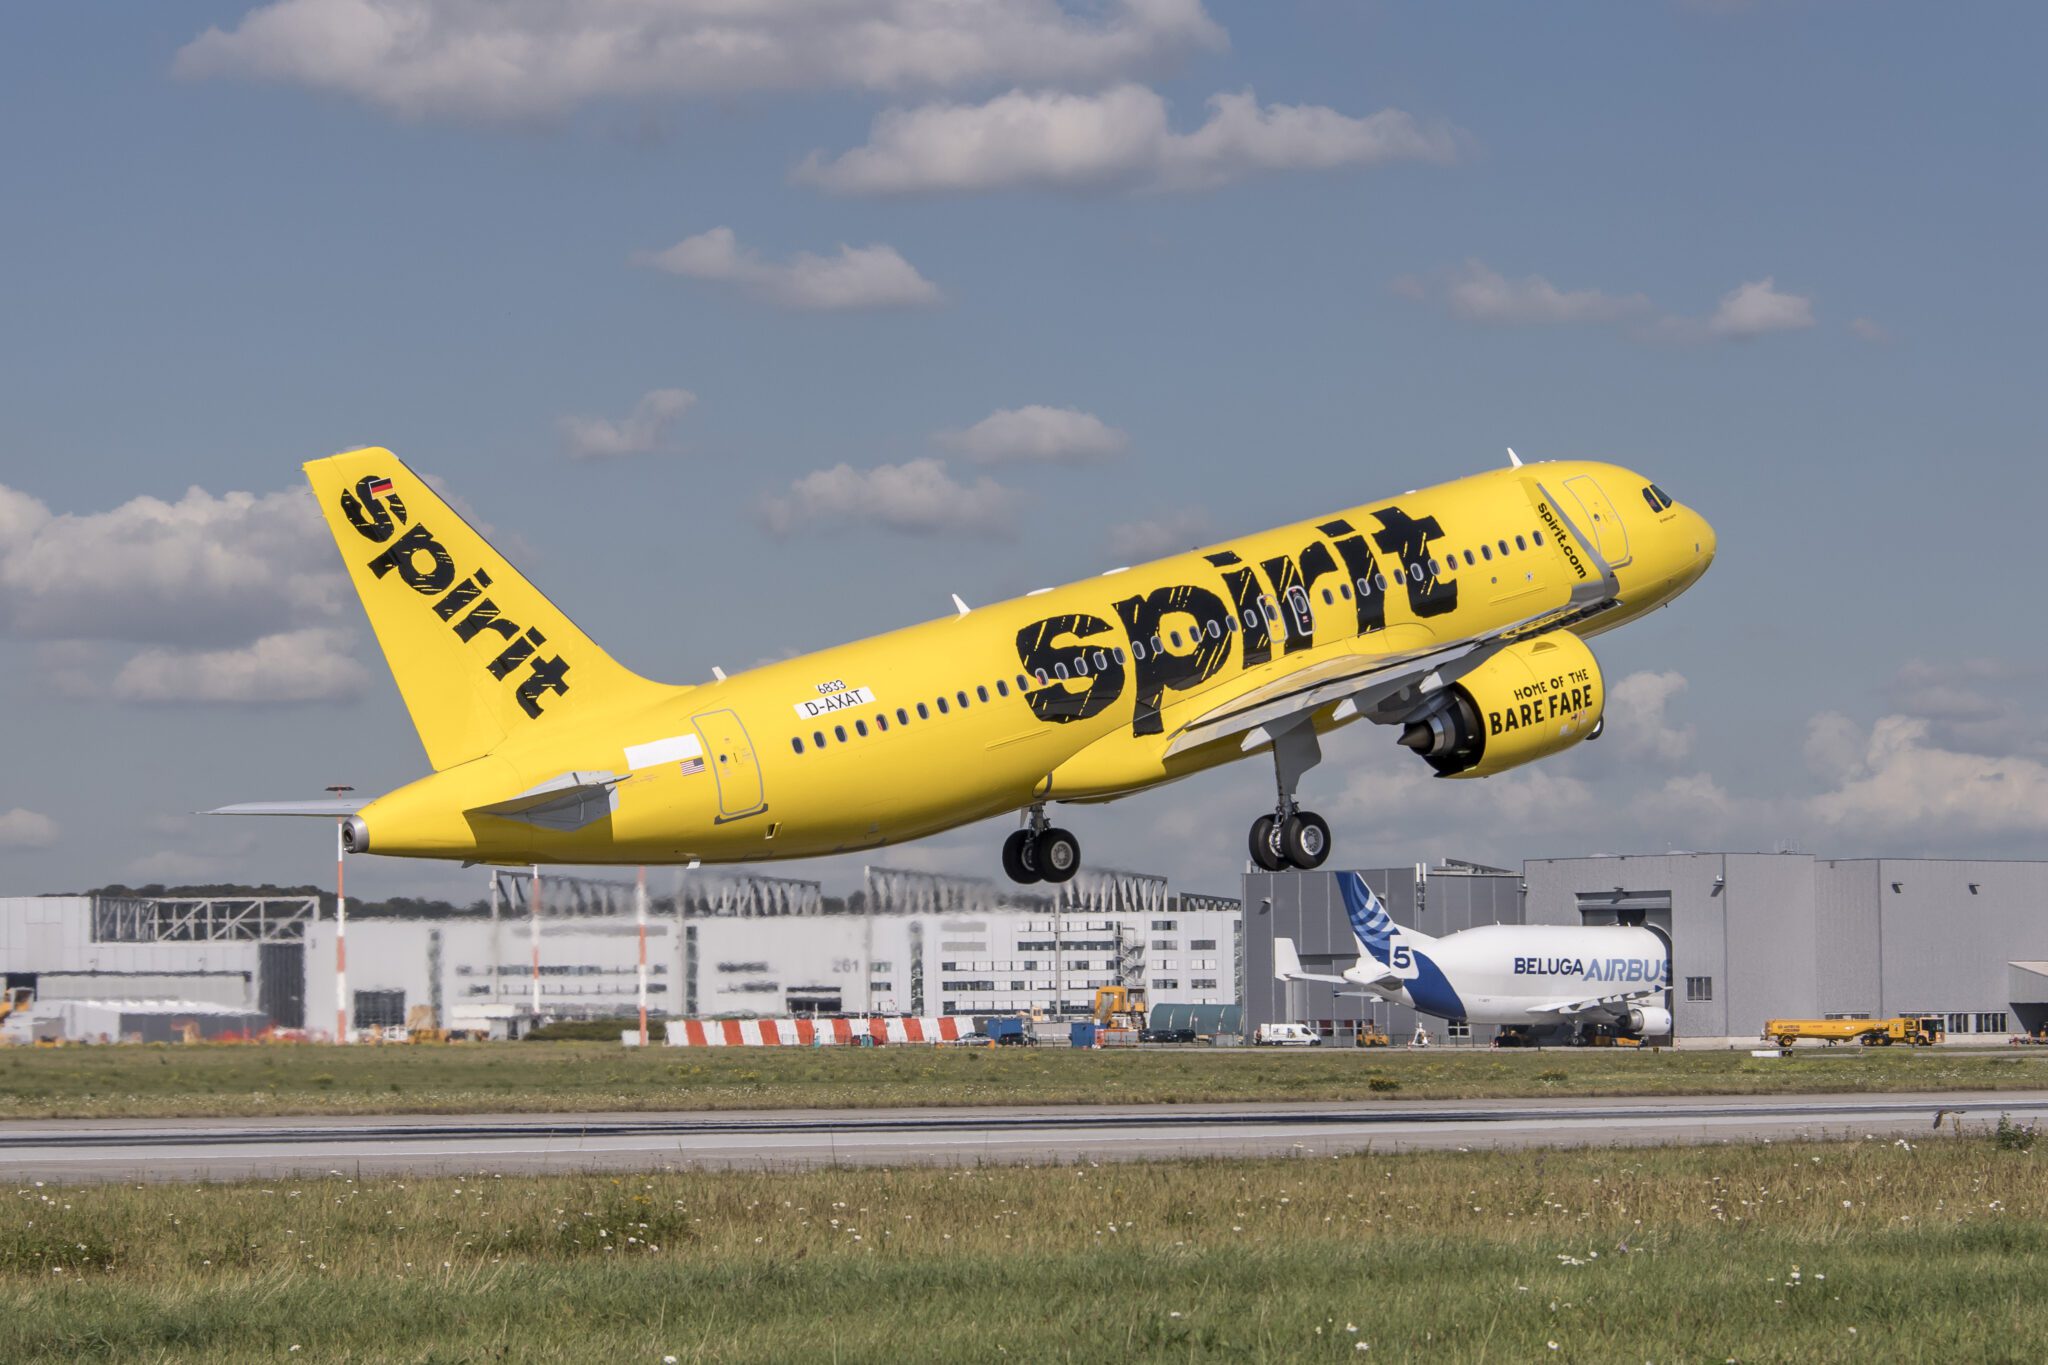 A Spirit Airlines Airbus A320neo. Airbus